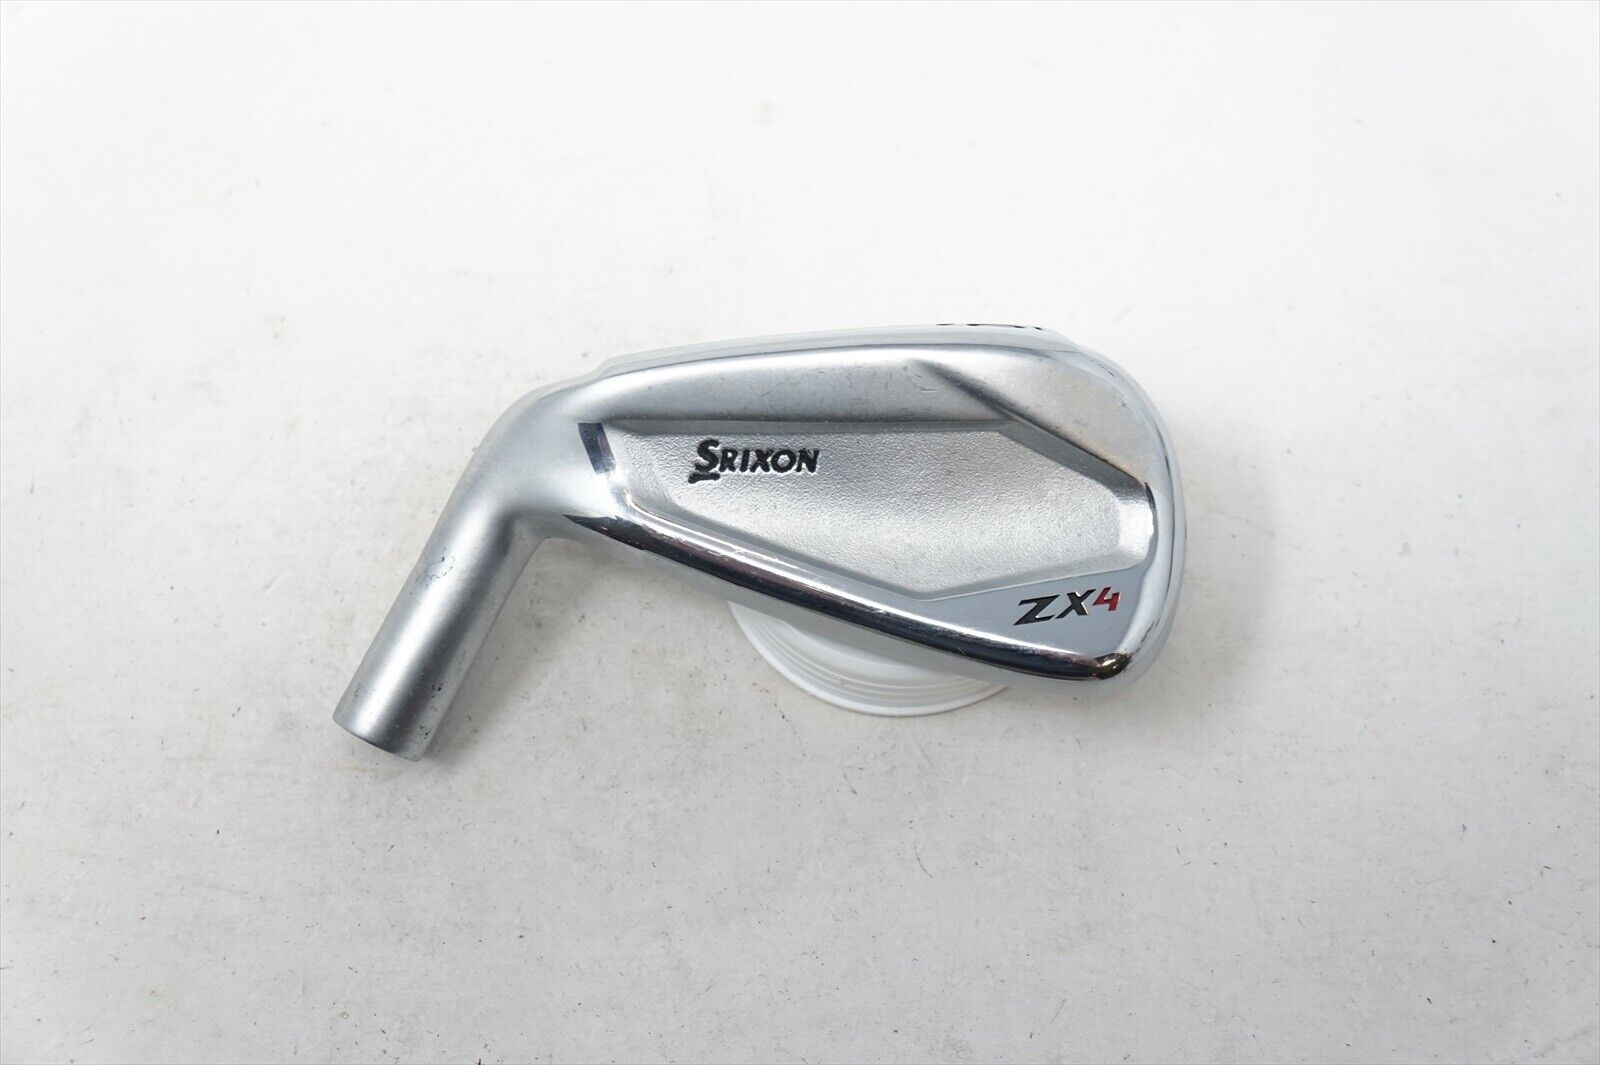 LH Srixon ZX4 Face Forged #6 Iron Club Head Only 1110972 Lefty Left Handed